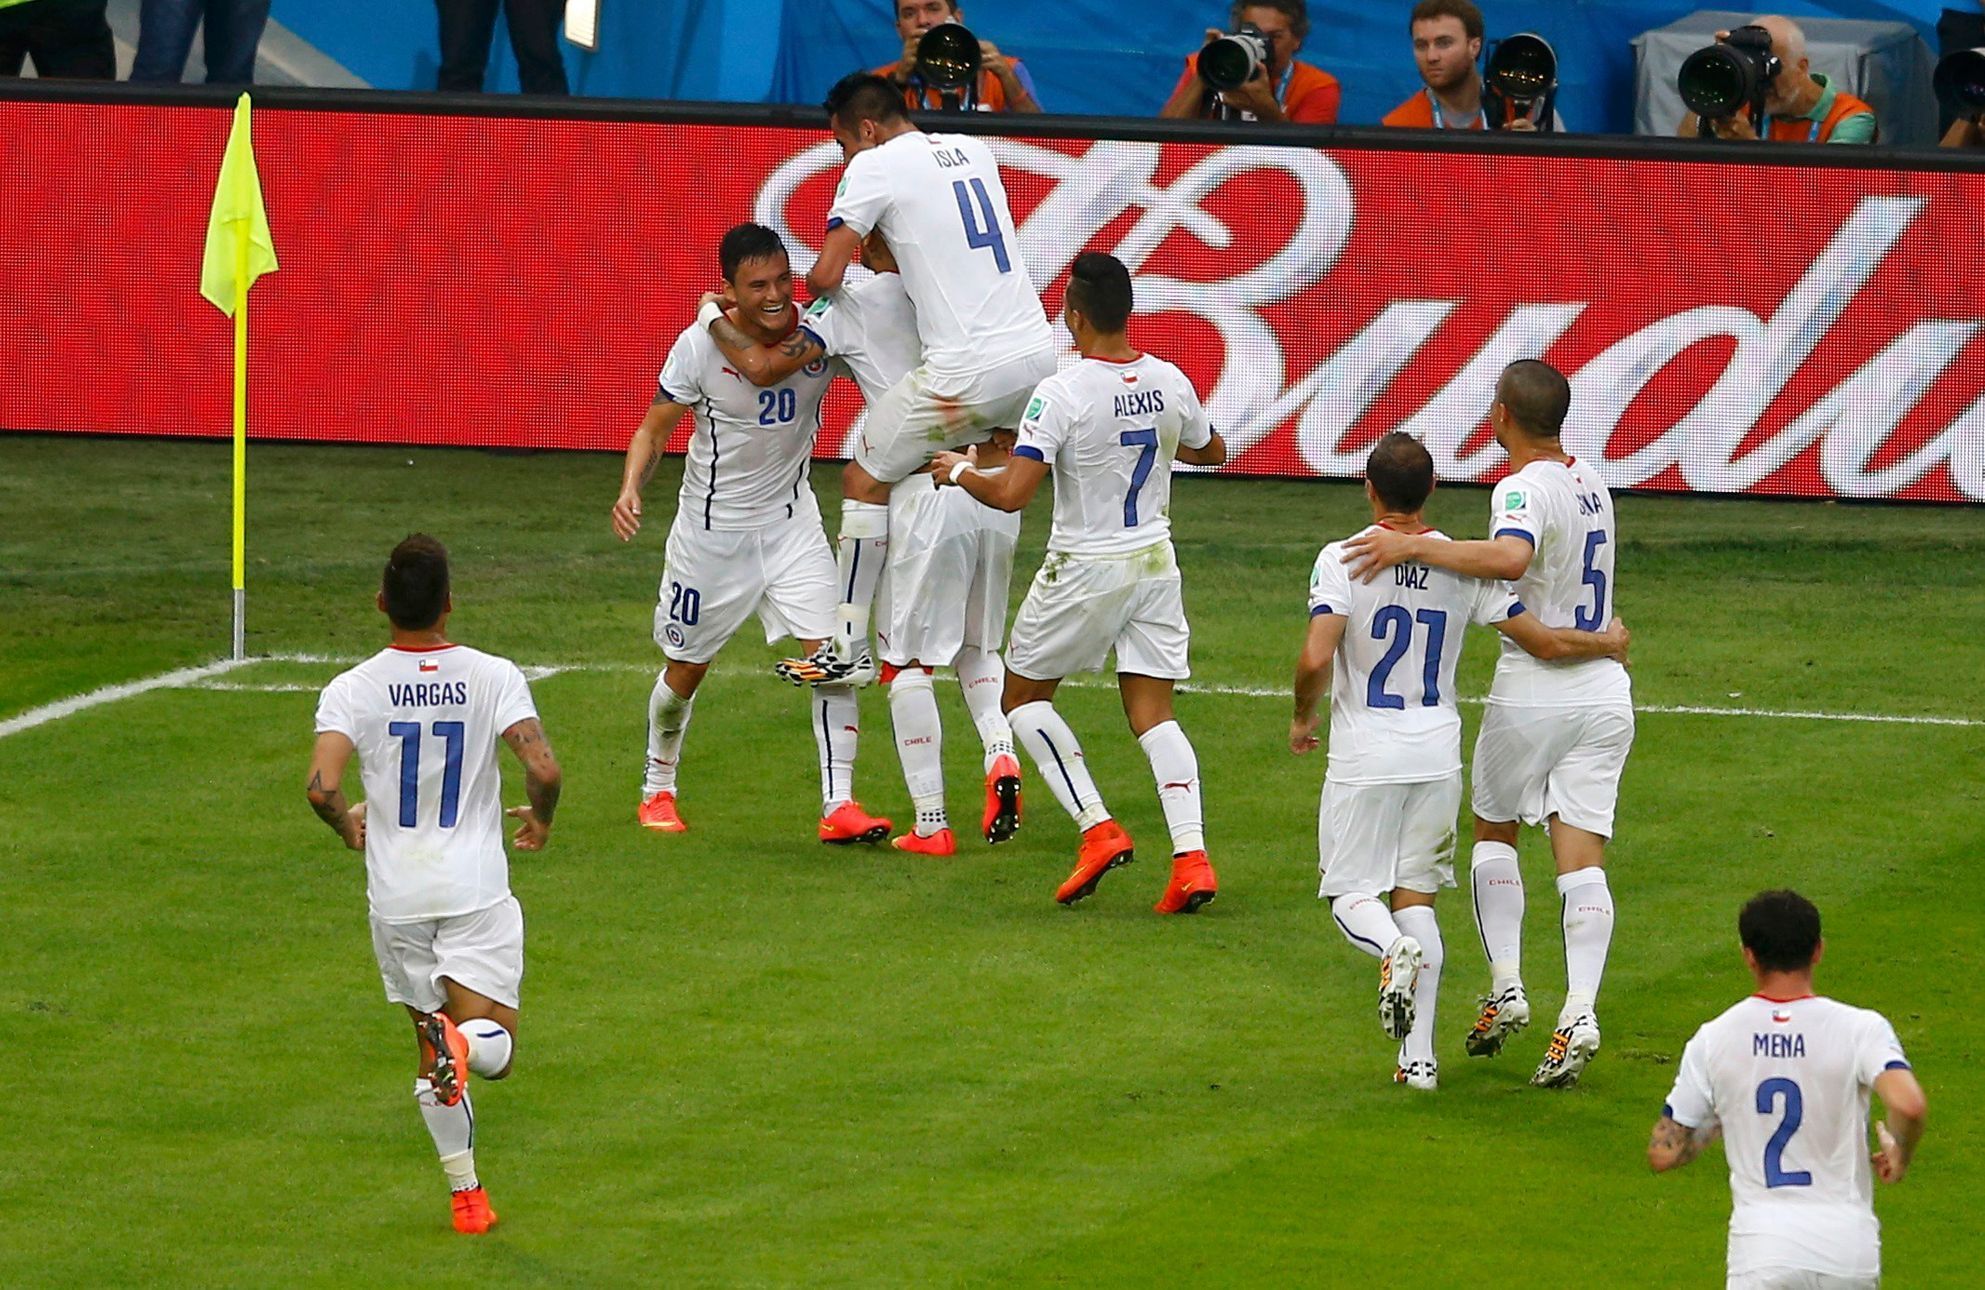 Chile's Charles Aranguiz is congratulated by teammates after his goal during the 2014 World Cup Group B soccer match between Spain and Chile at the Maracana stadium